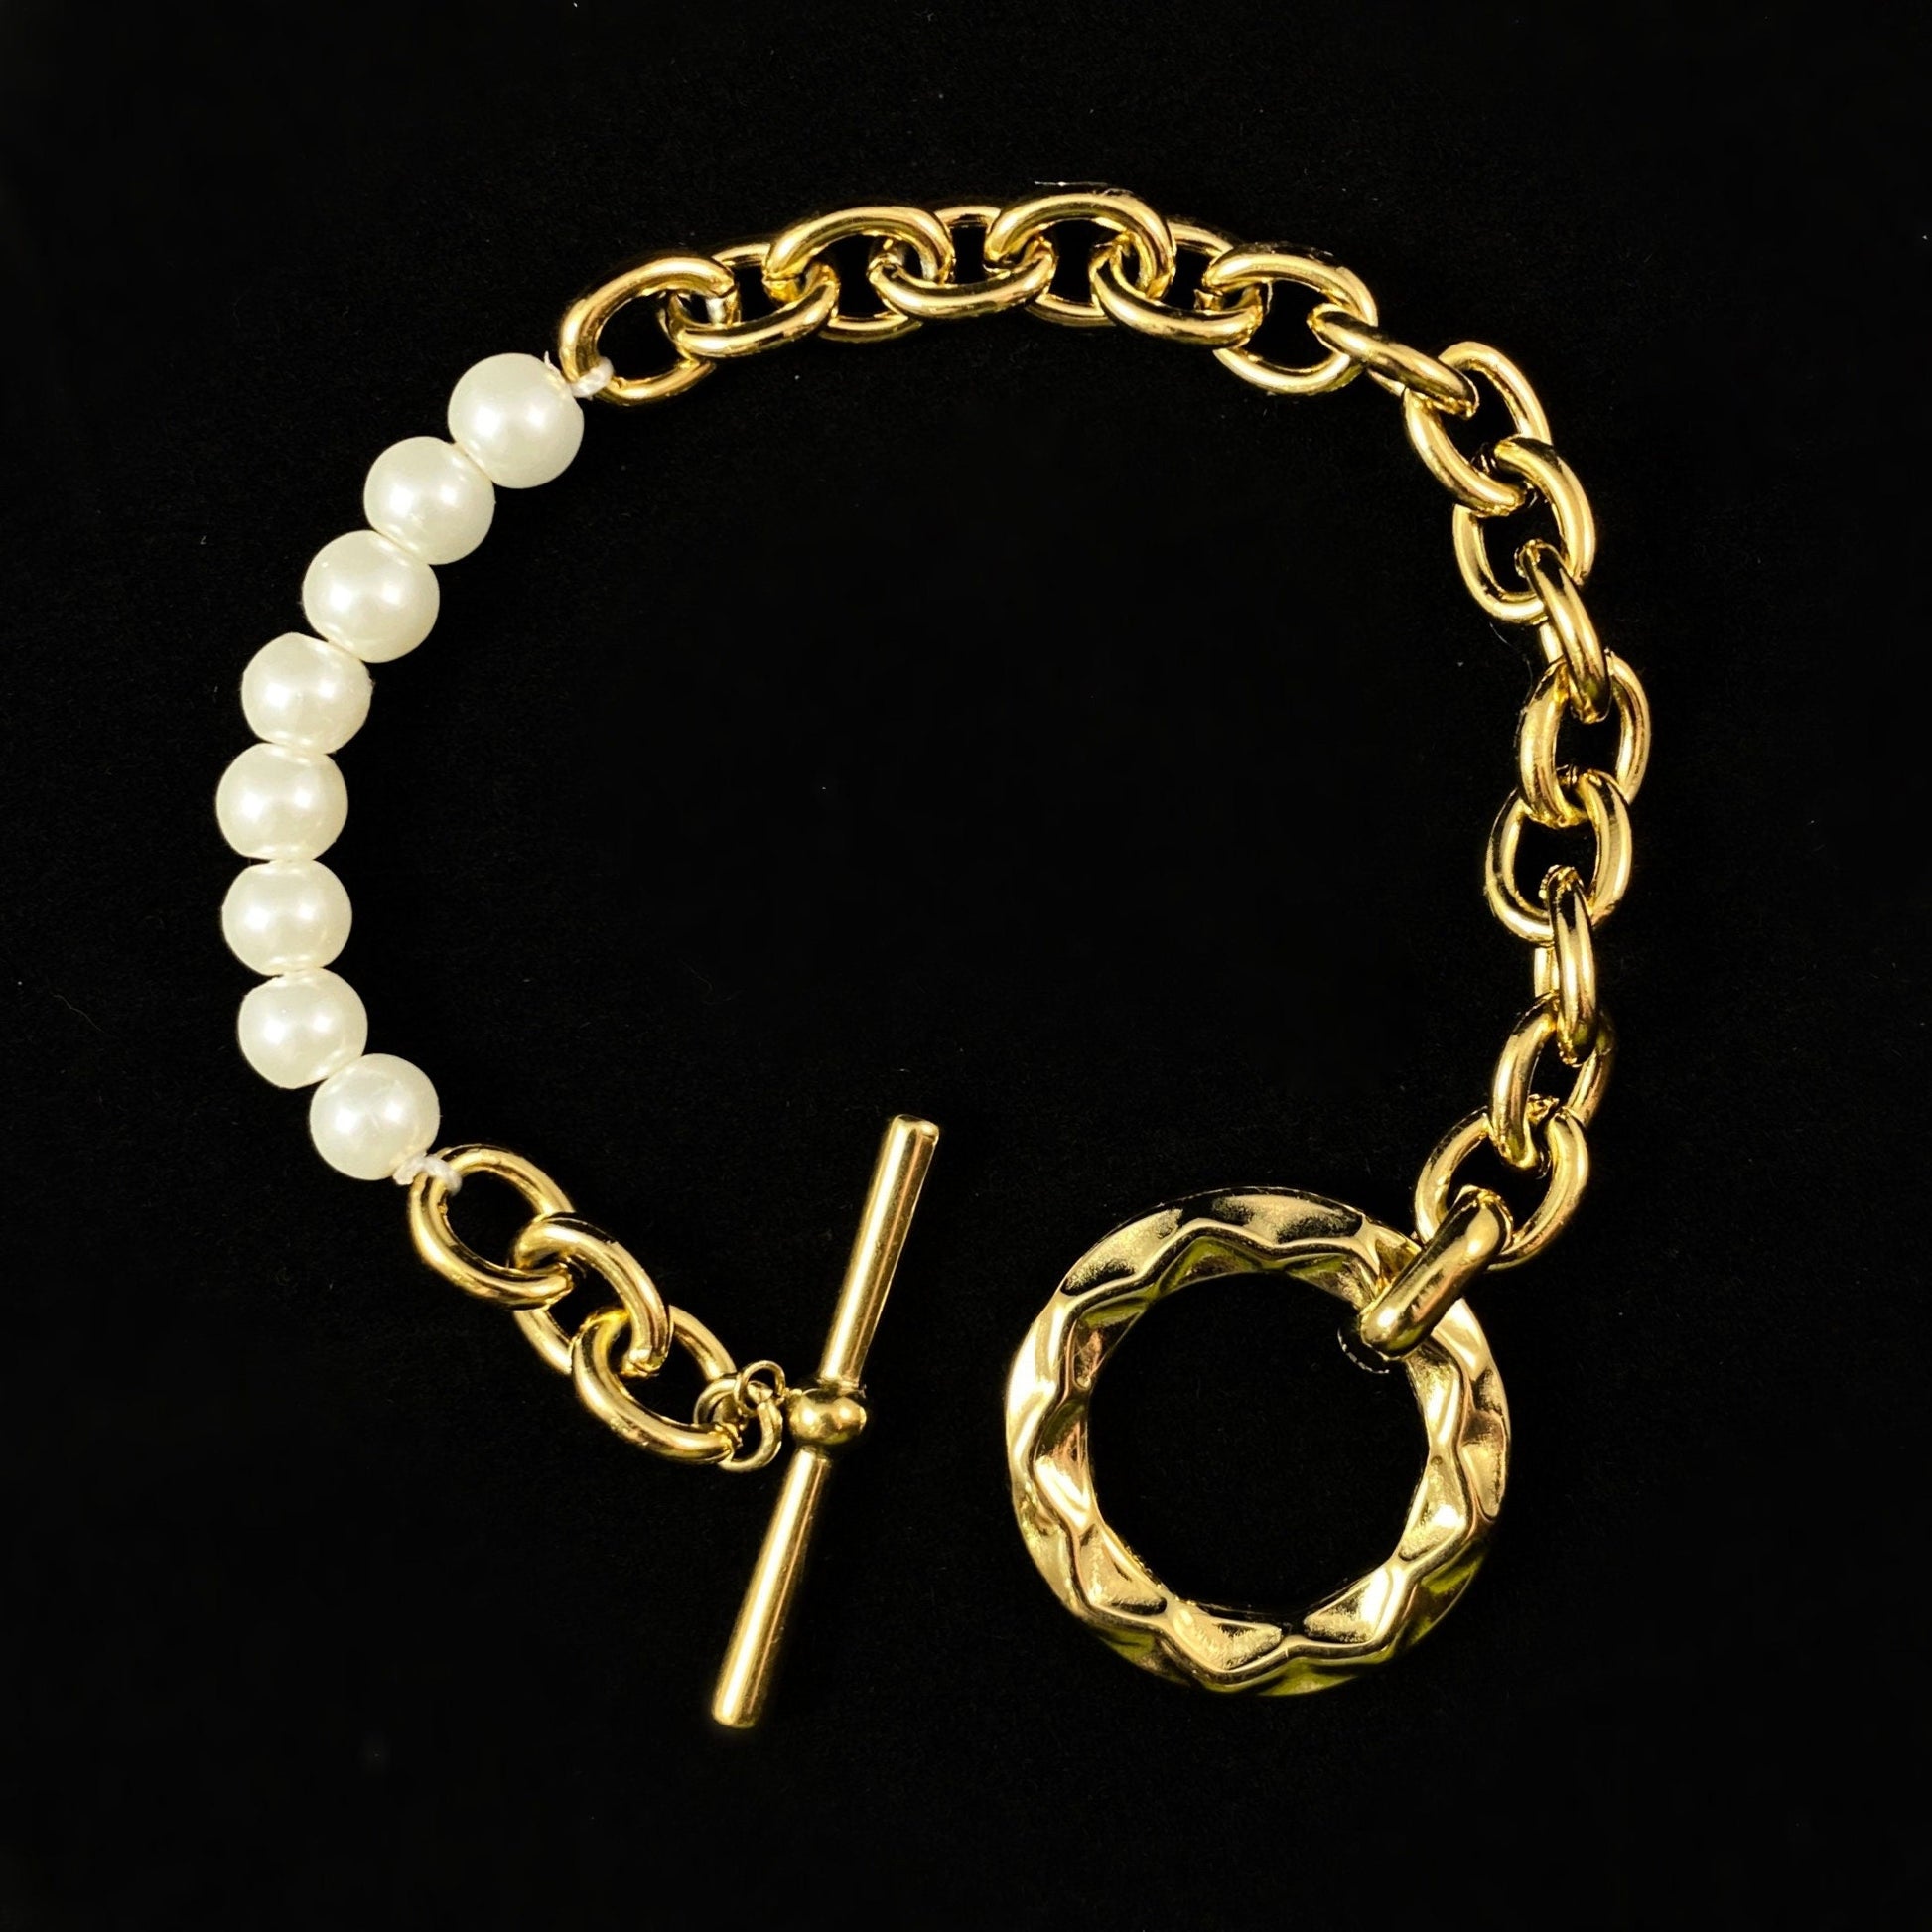 White Pearl Bracelet with Chunky Gold Chain and Decorative Sunburst Toggle Clasp